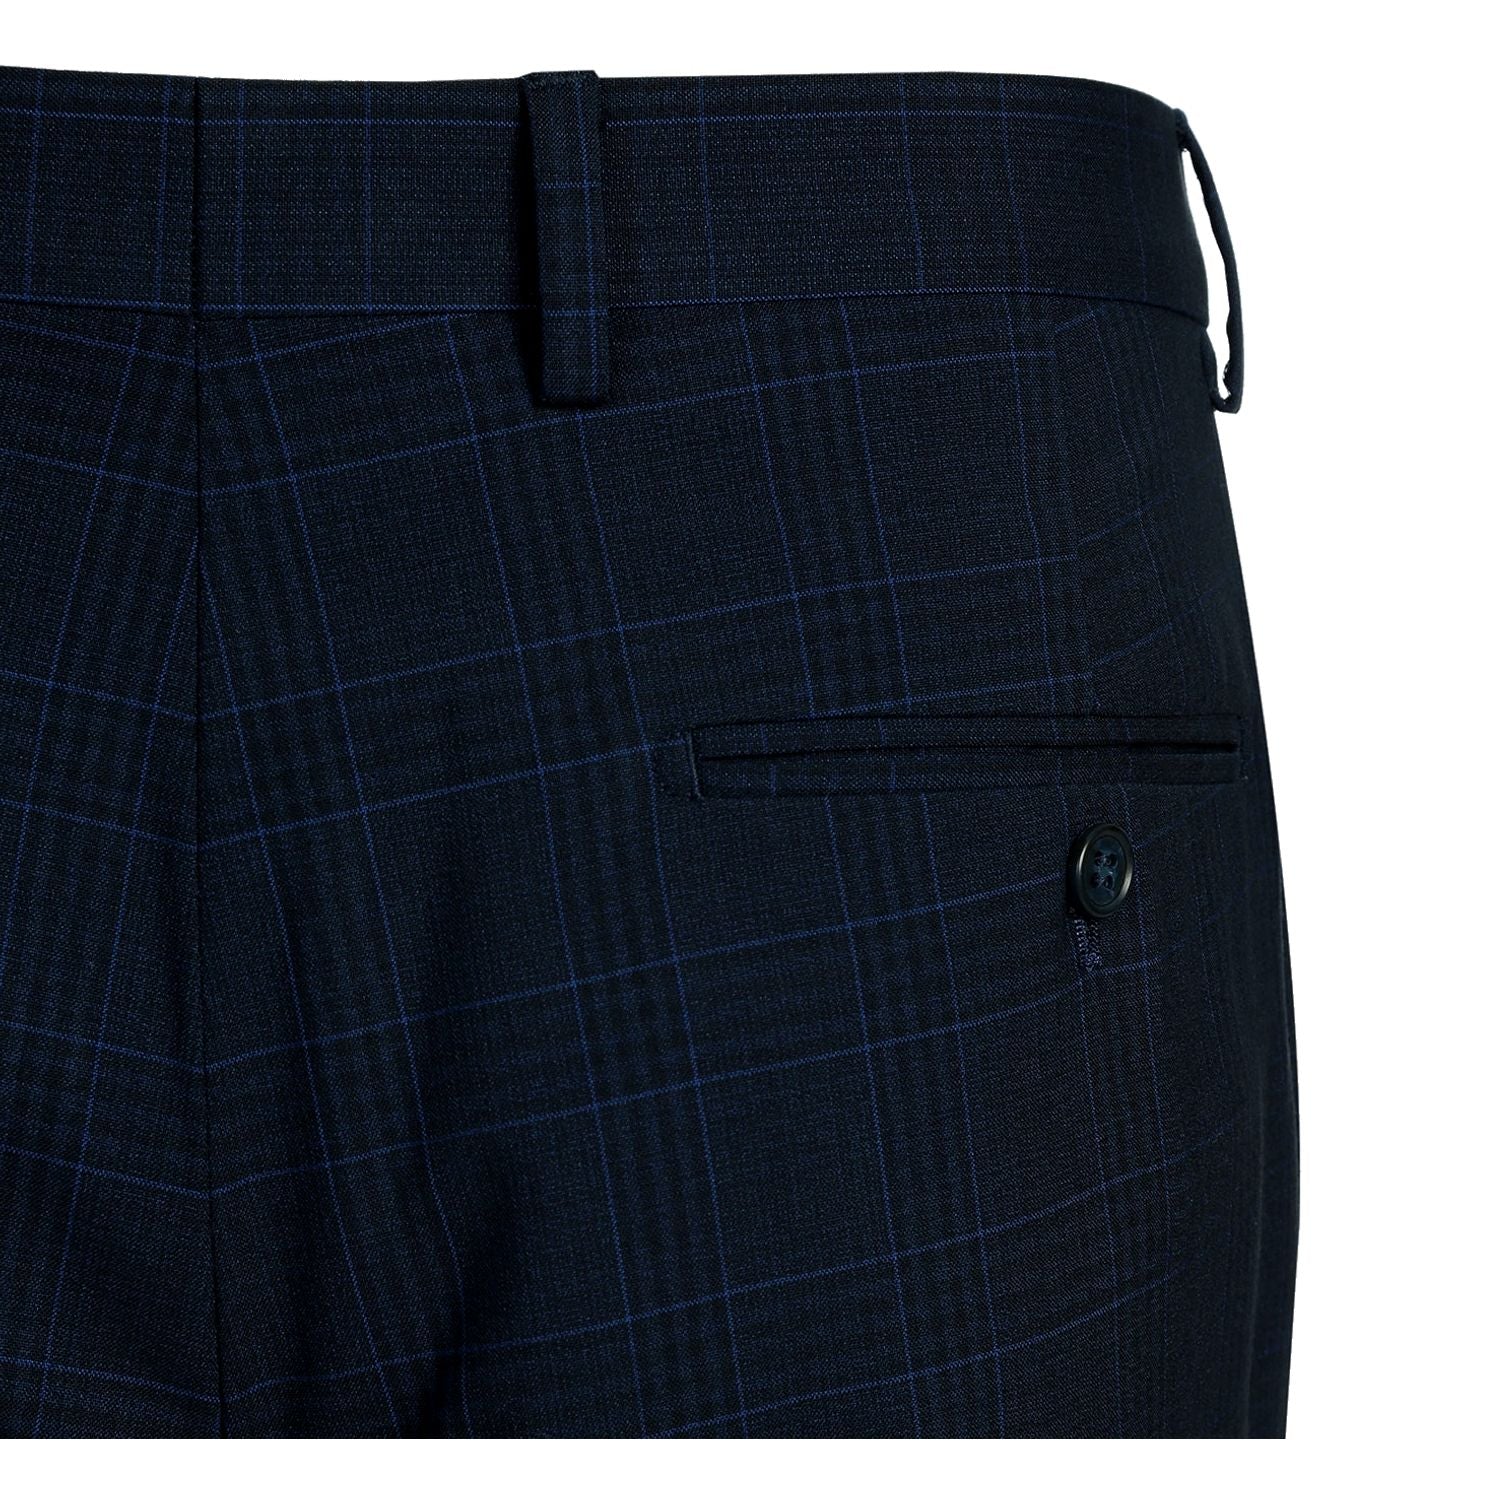 Stretch Performance 2-Button CLASSIC FIT Suit in Navy Check (Short, Regular, and Long Available) by Renoir